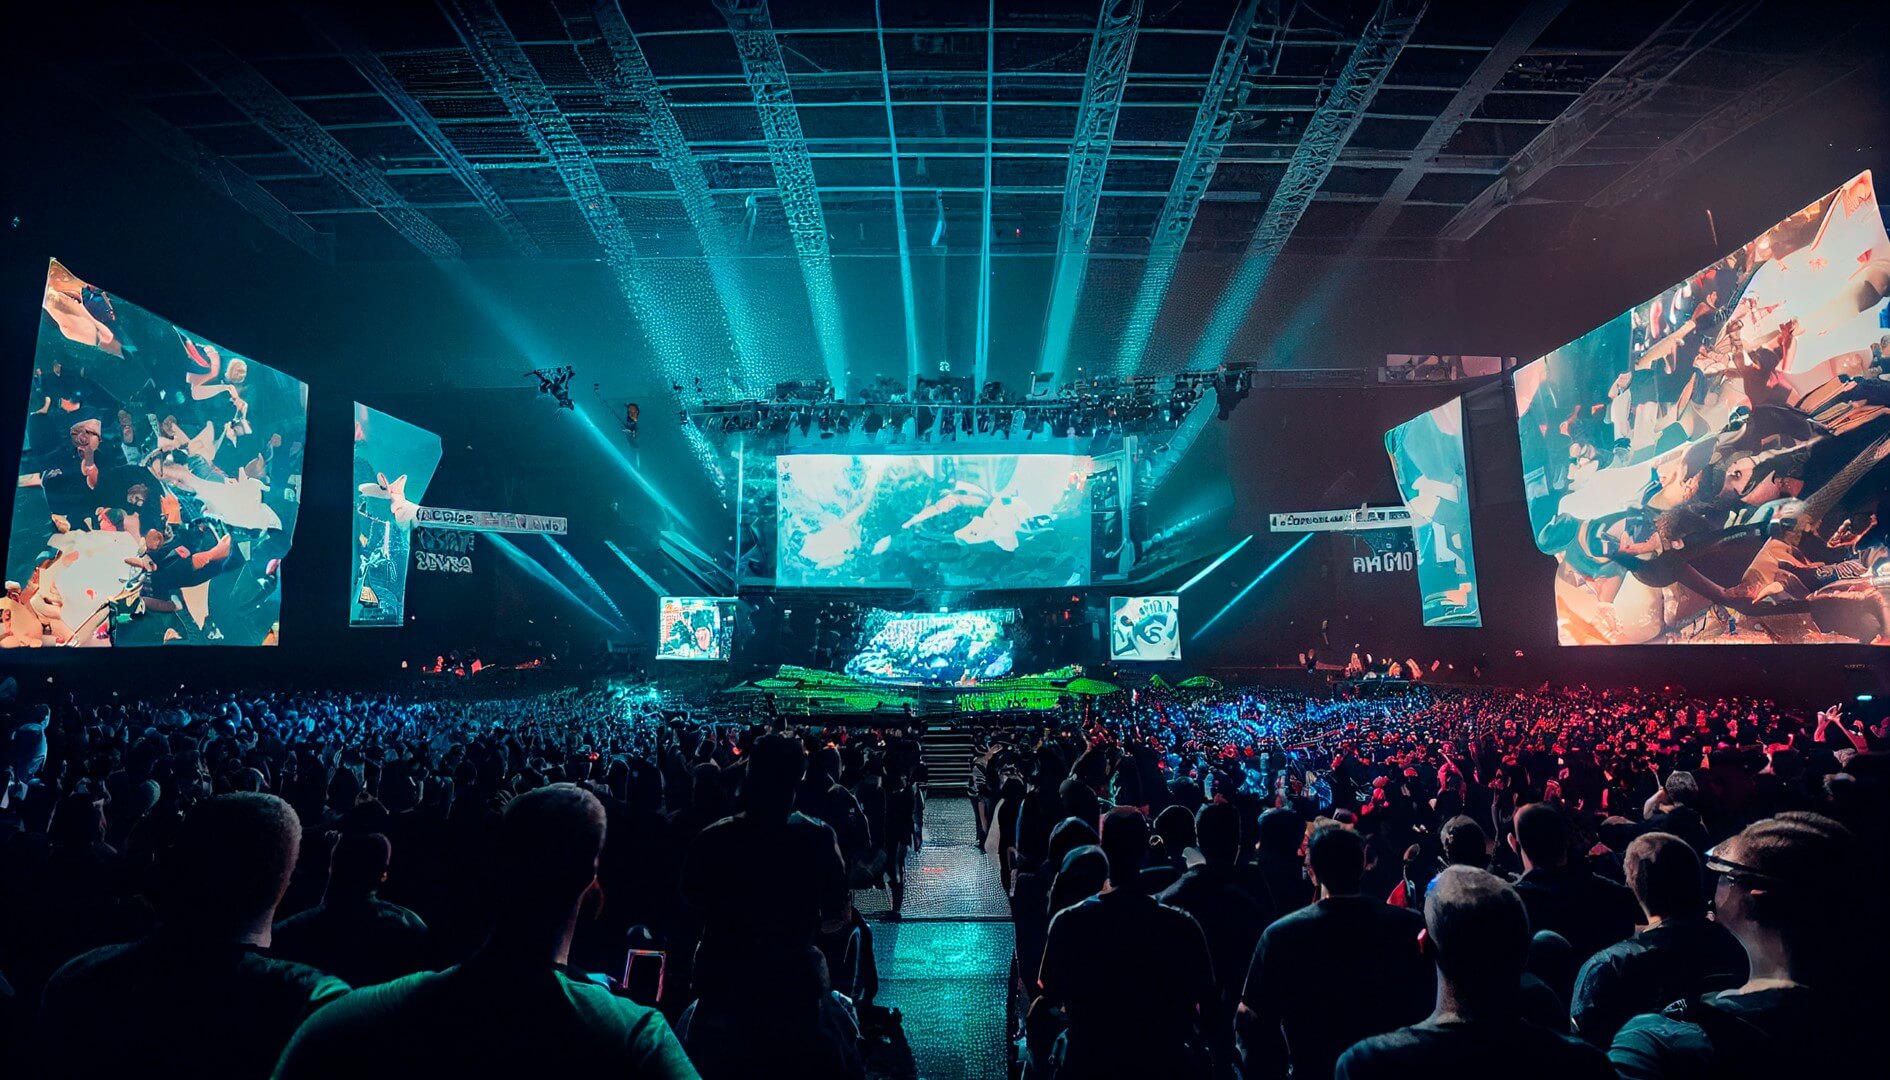 Arena filled with colorful led lights and led monitor